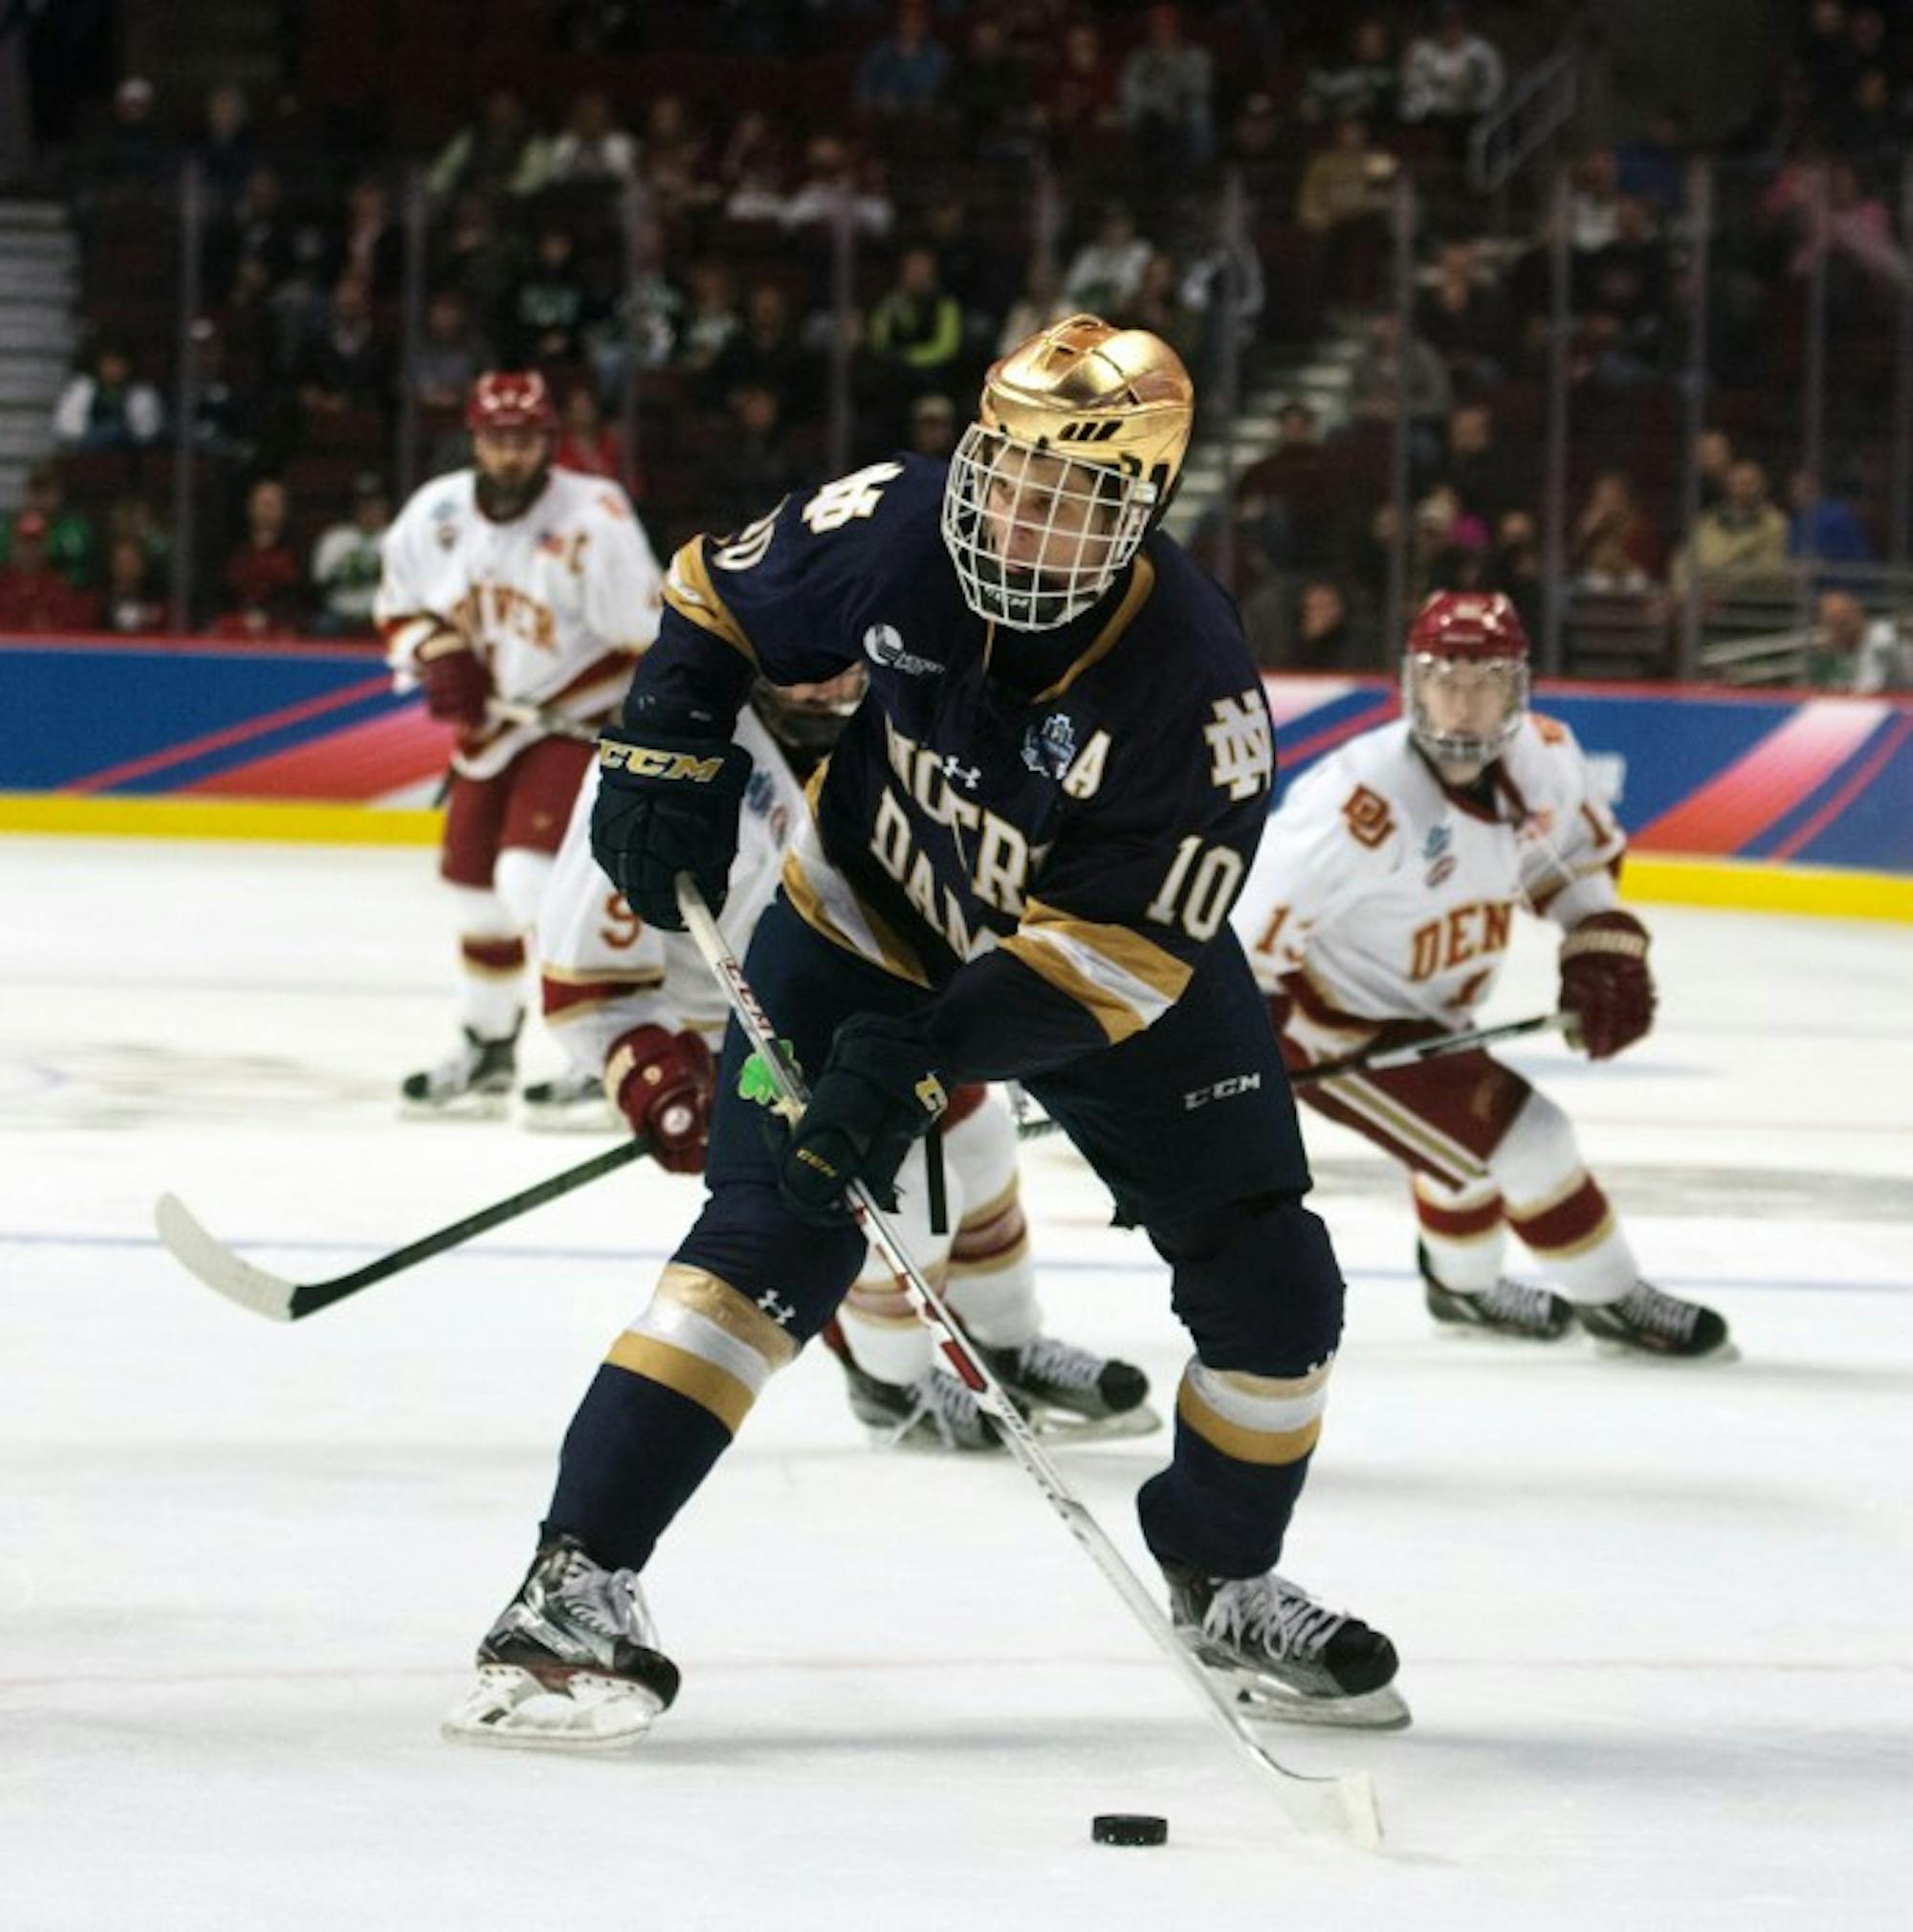 Irish junior forward Anders Bjork looks to pass the puck during Notre Dame’s 6-1 loss to Denver in the Frozen Four on April 6 at the United Center in Chicago. Bjork took one shot in the game.